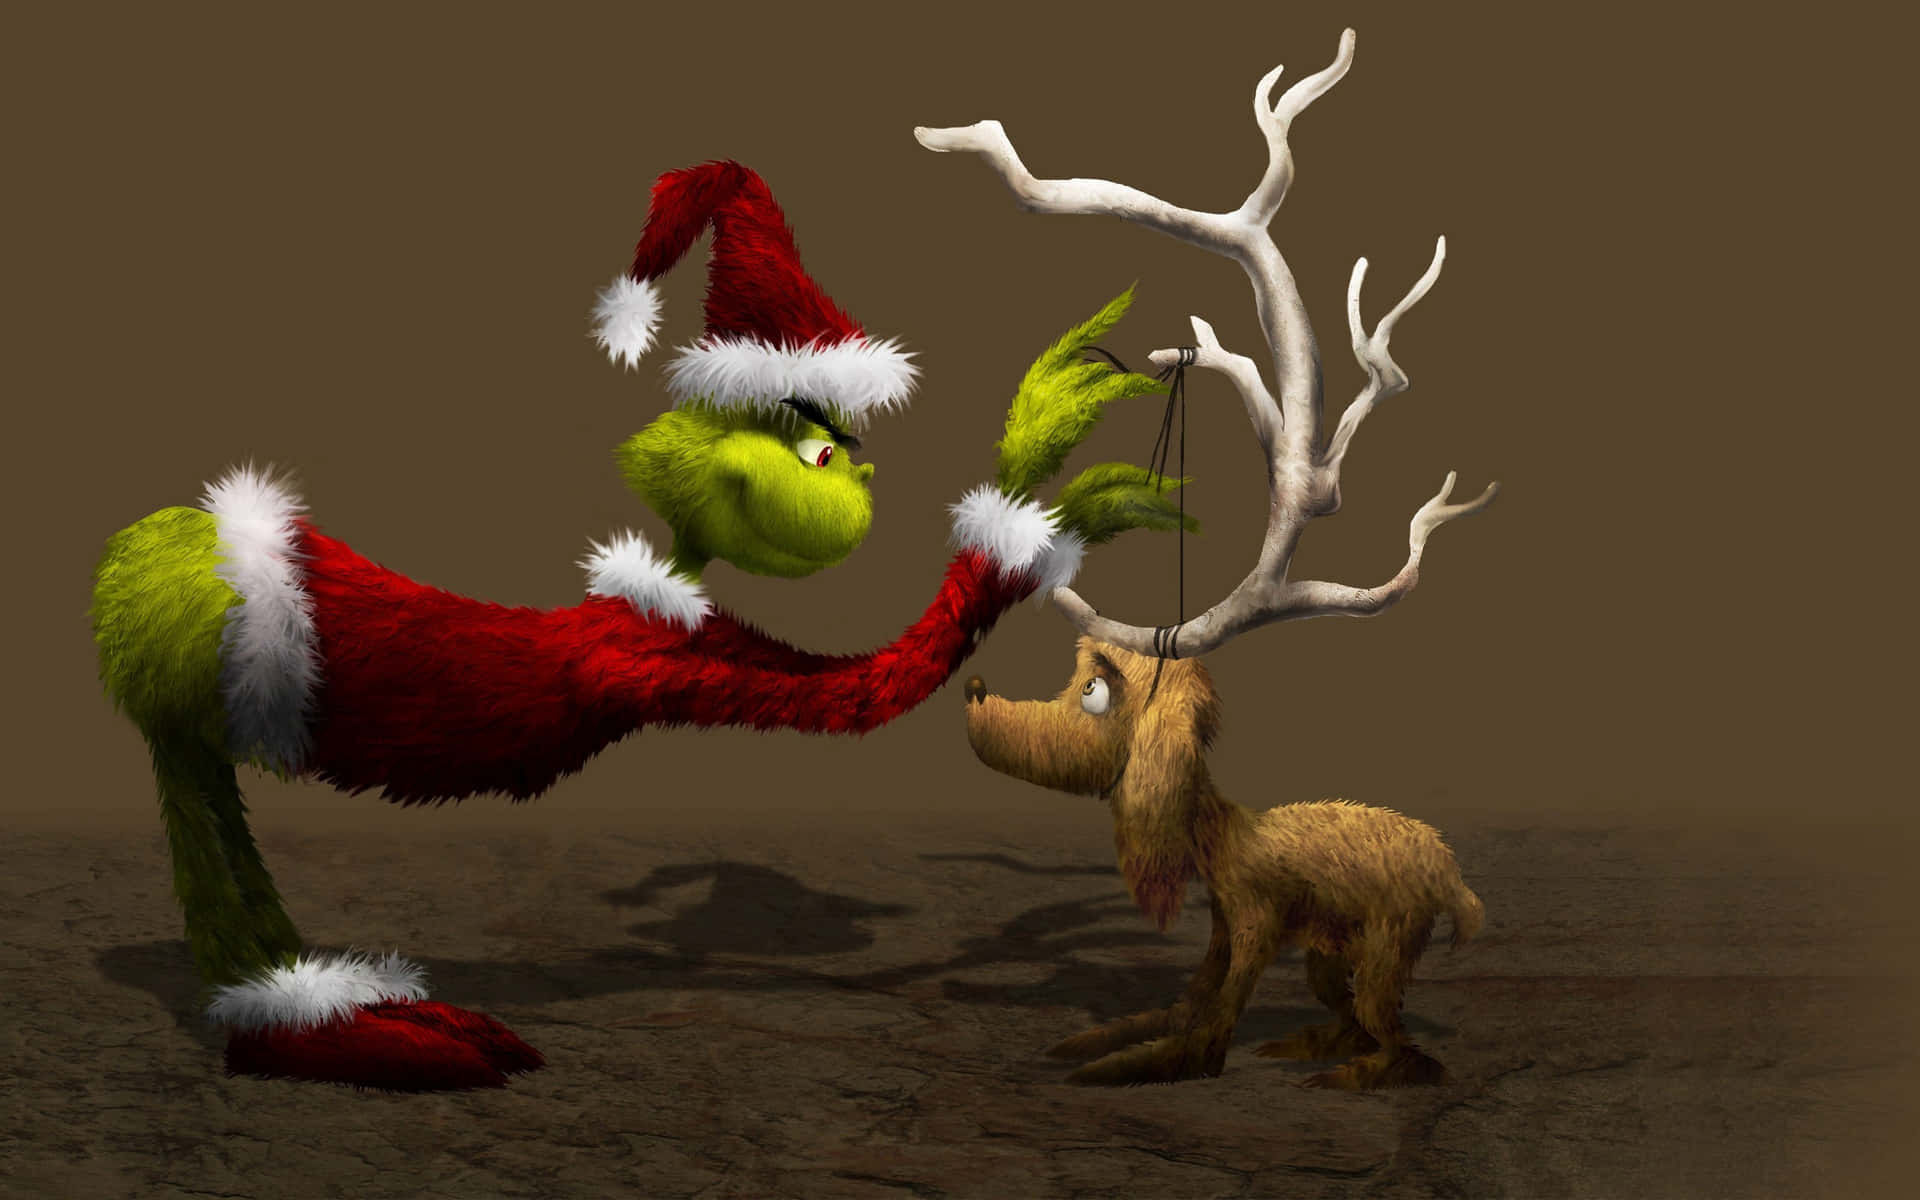 The Grinch is ready to spread Christmas cheer this year! Wallpaper